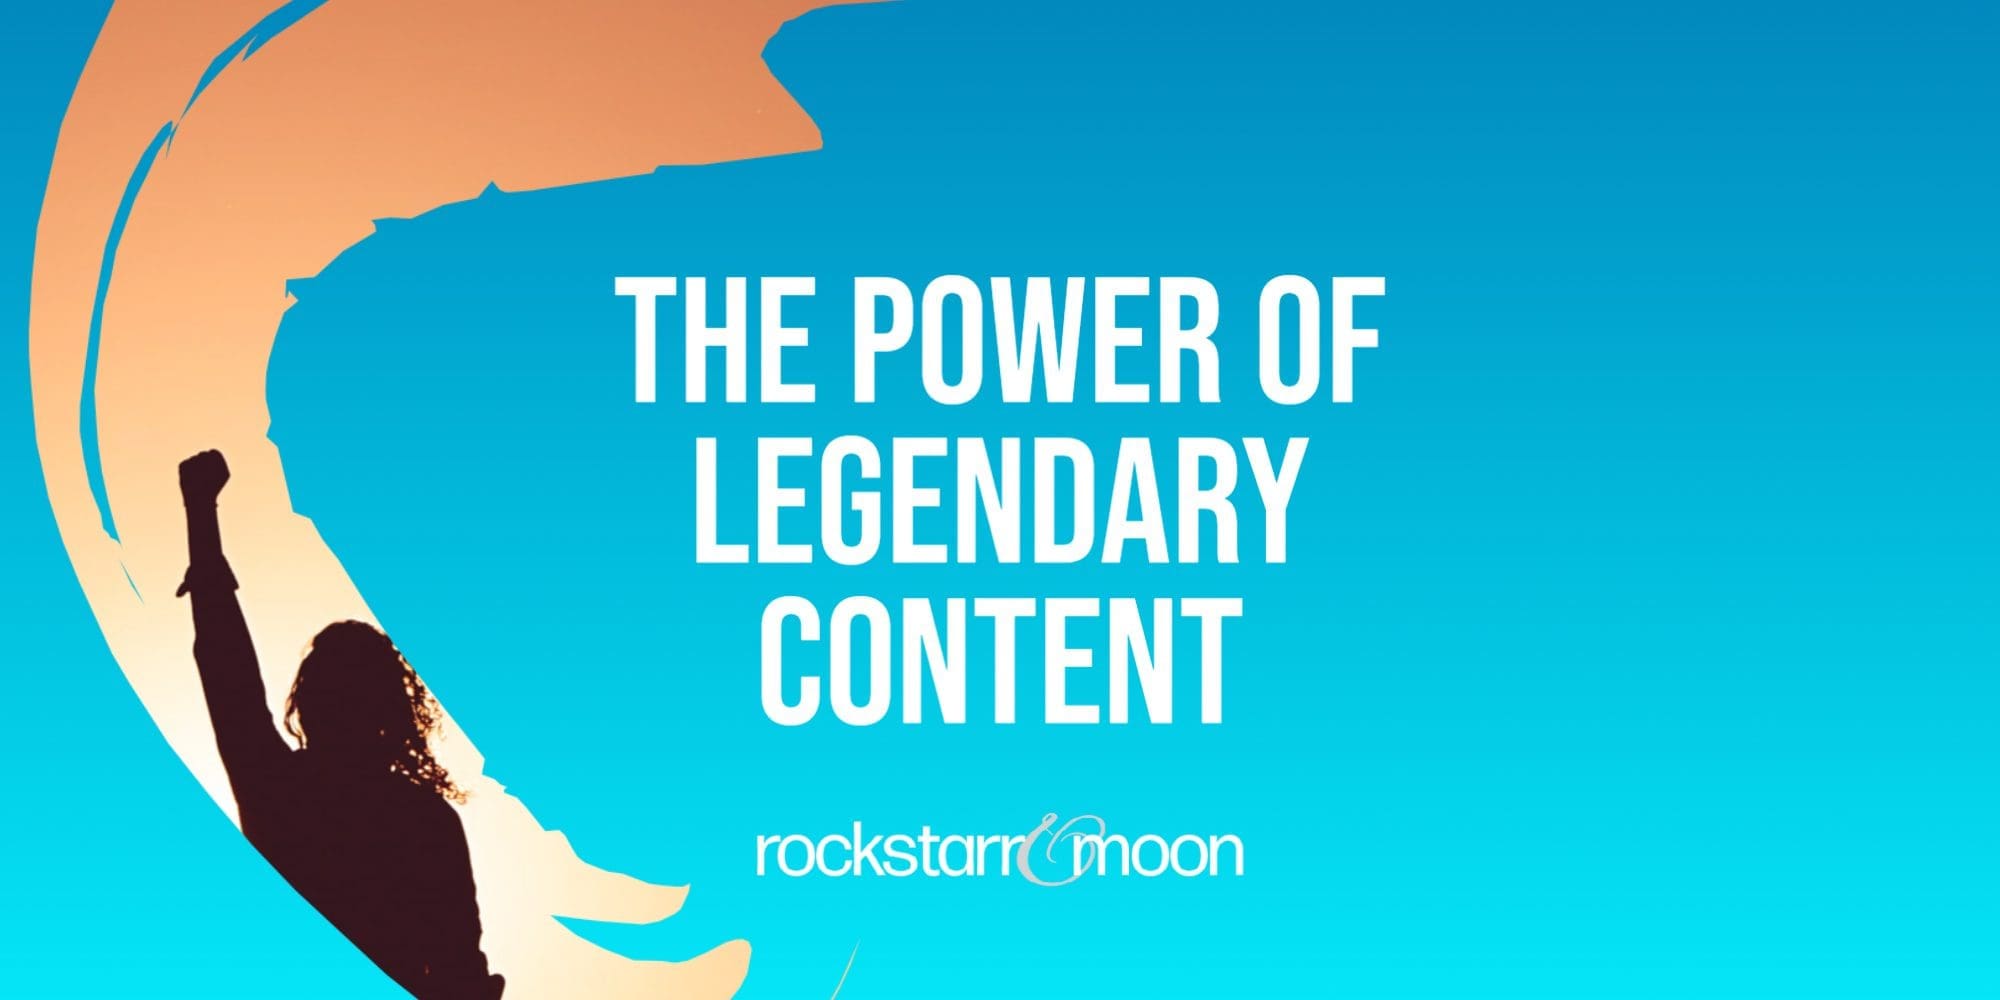 The Power of Legendary Content